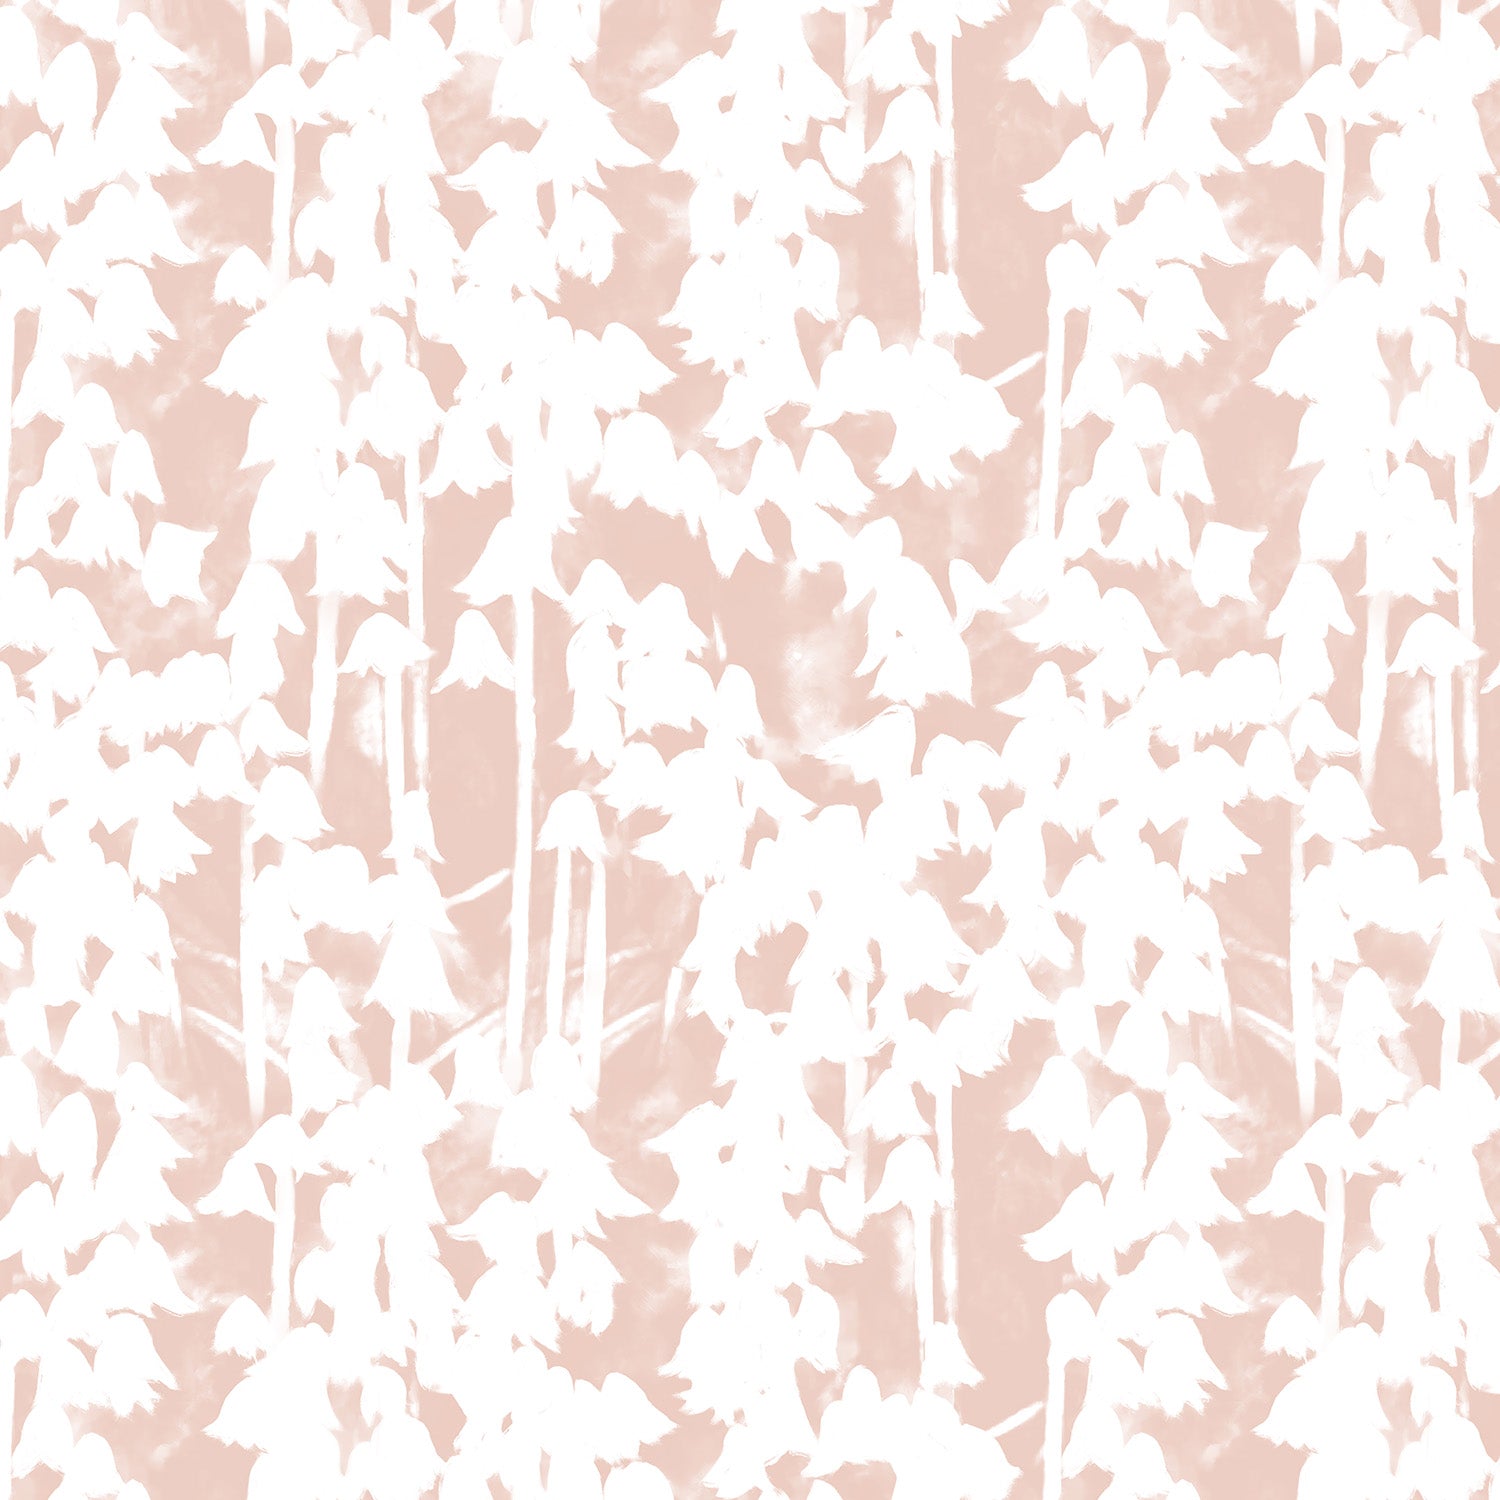 Detail of wallpaper in a painterly bluebell pattern in white on a mottled light pink field.